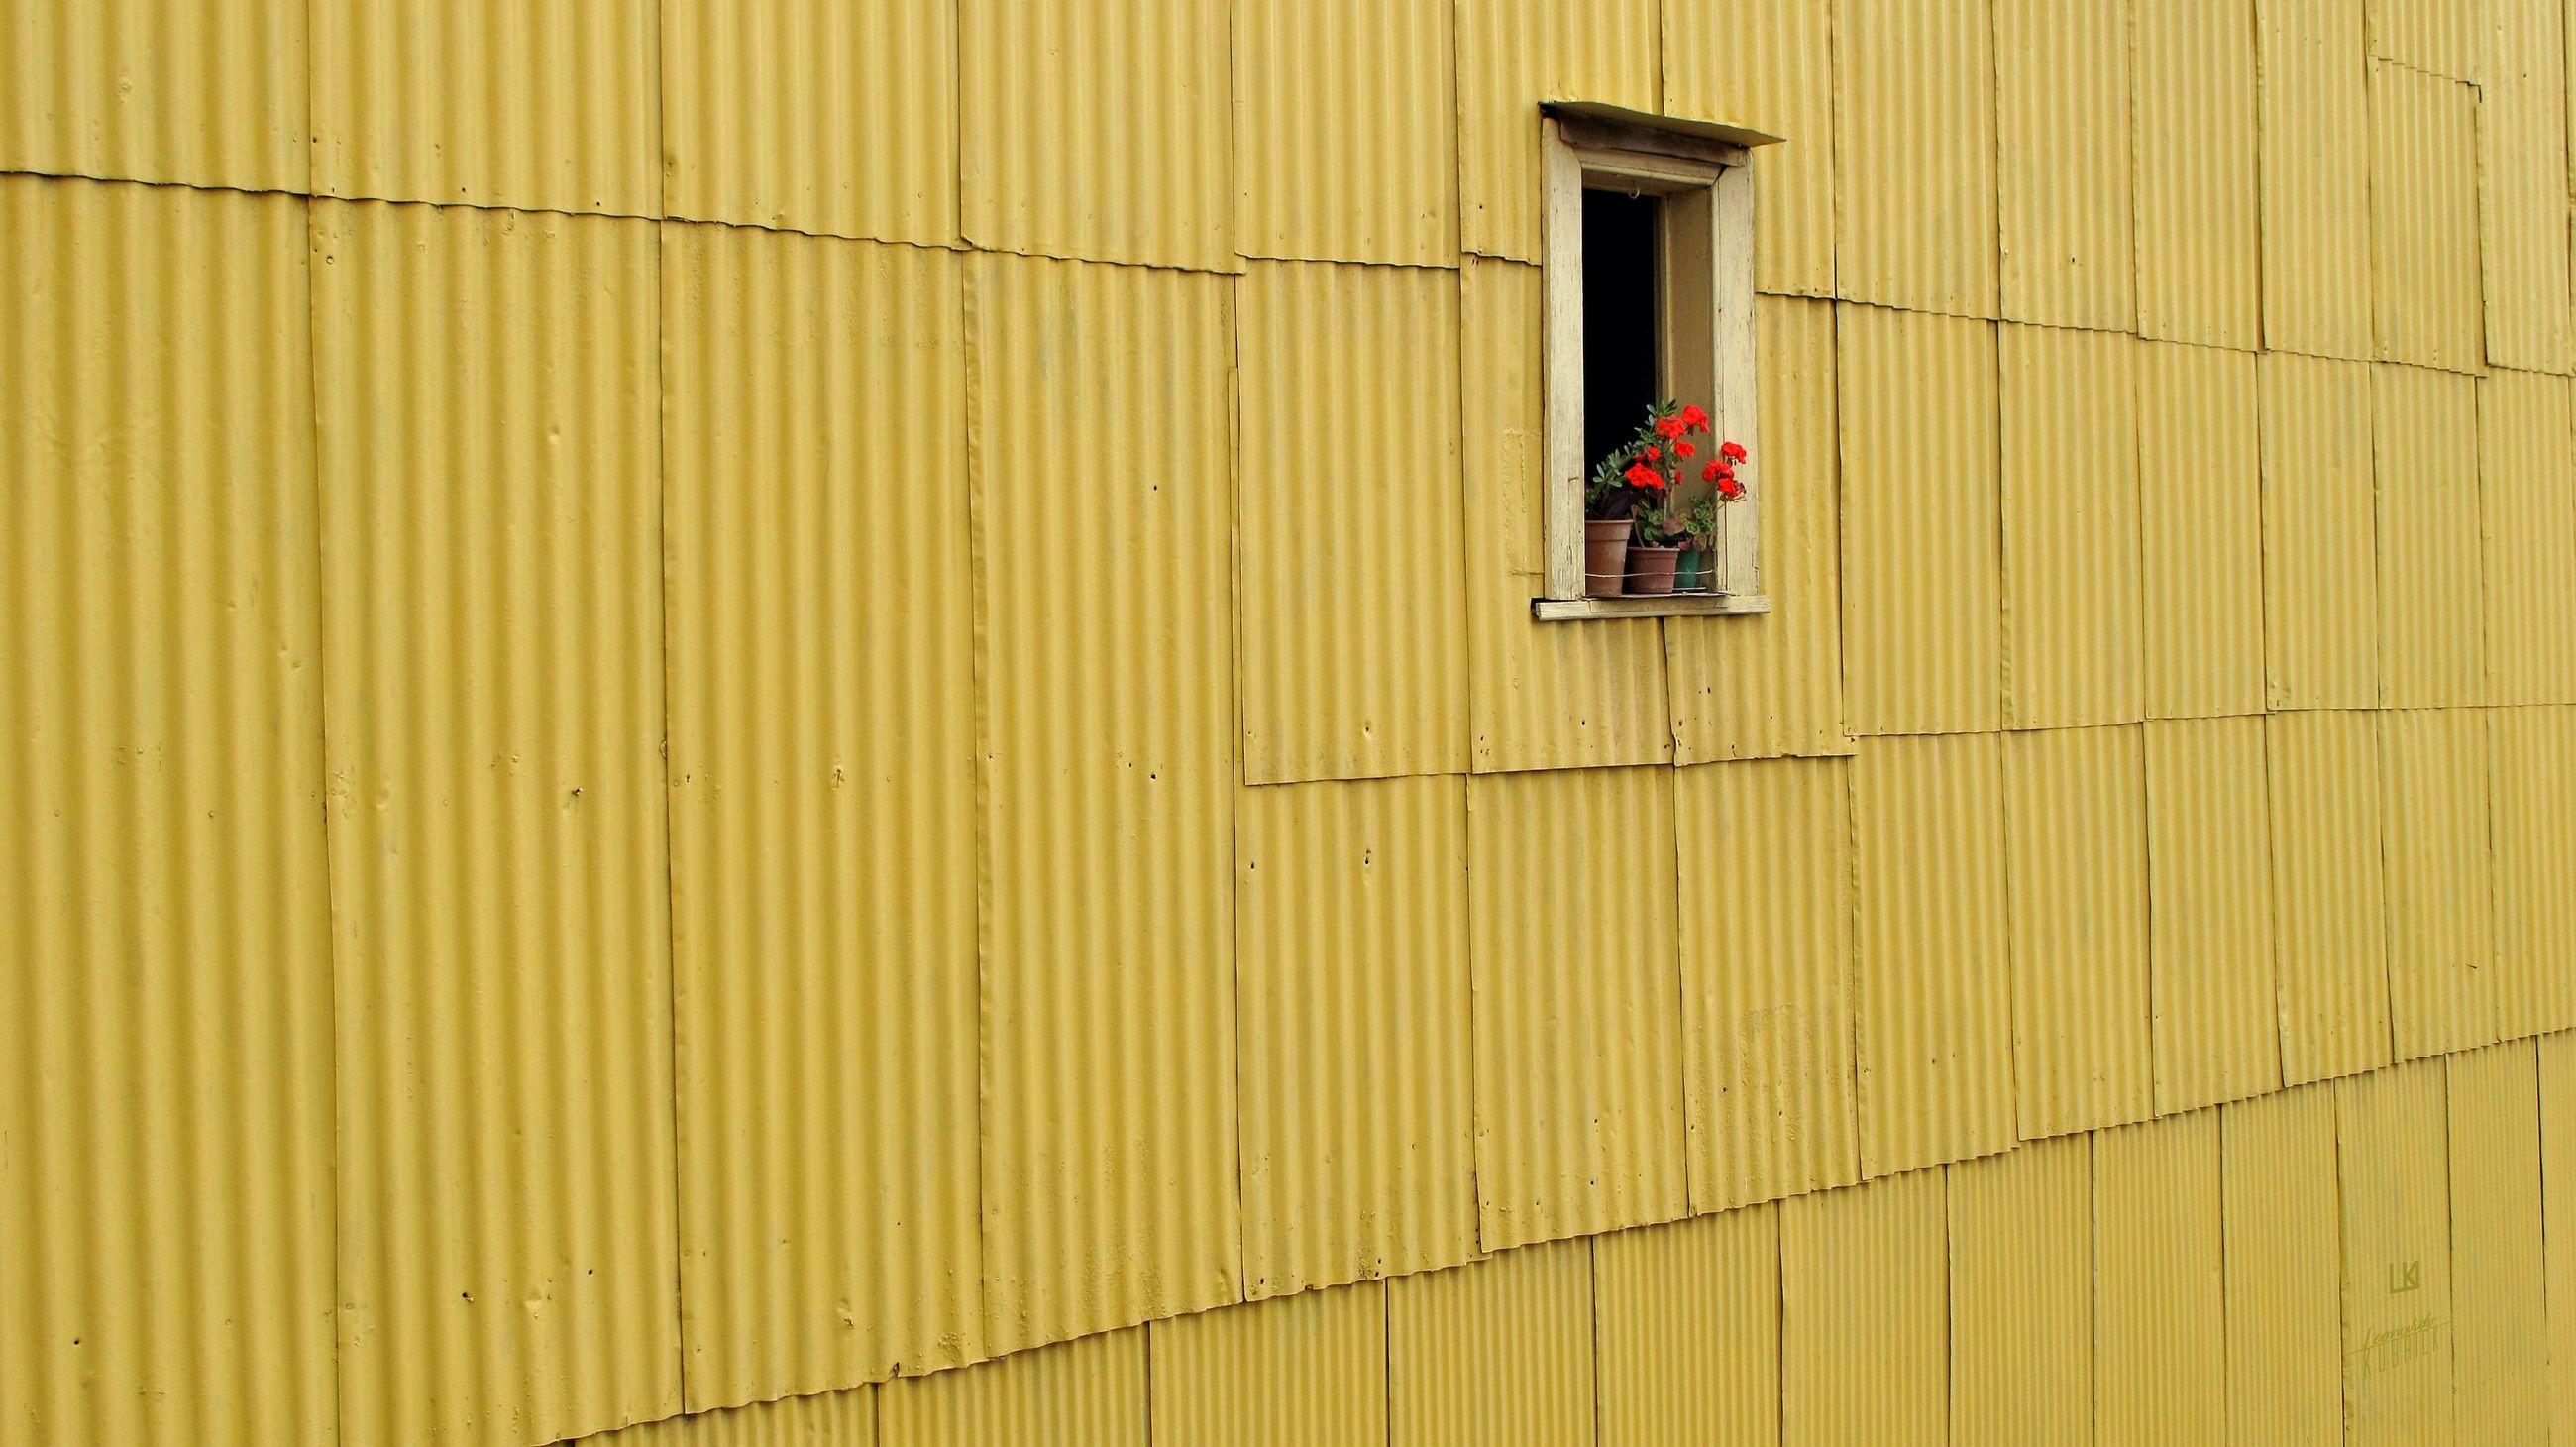 architecture, built structure, yellow, building exterior, day, wall - building feature, outdoors, no people, working, occupation, building, low angle view, transportation, pattern, flowering plant, safety, window